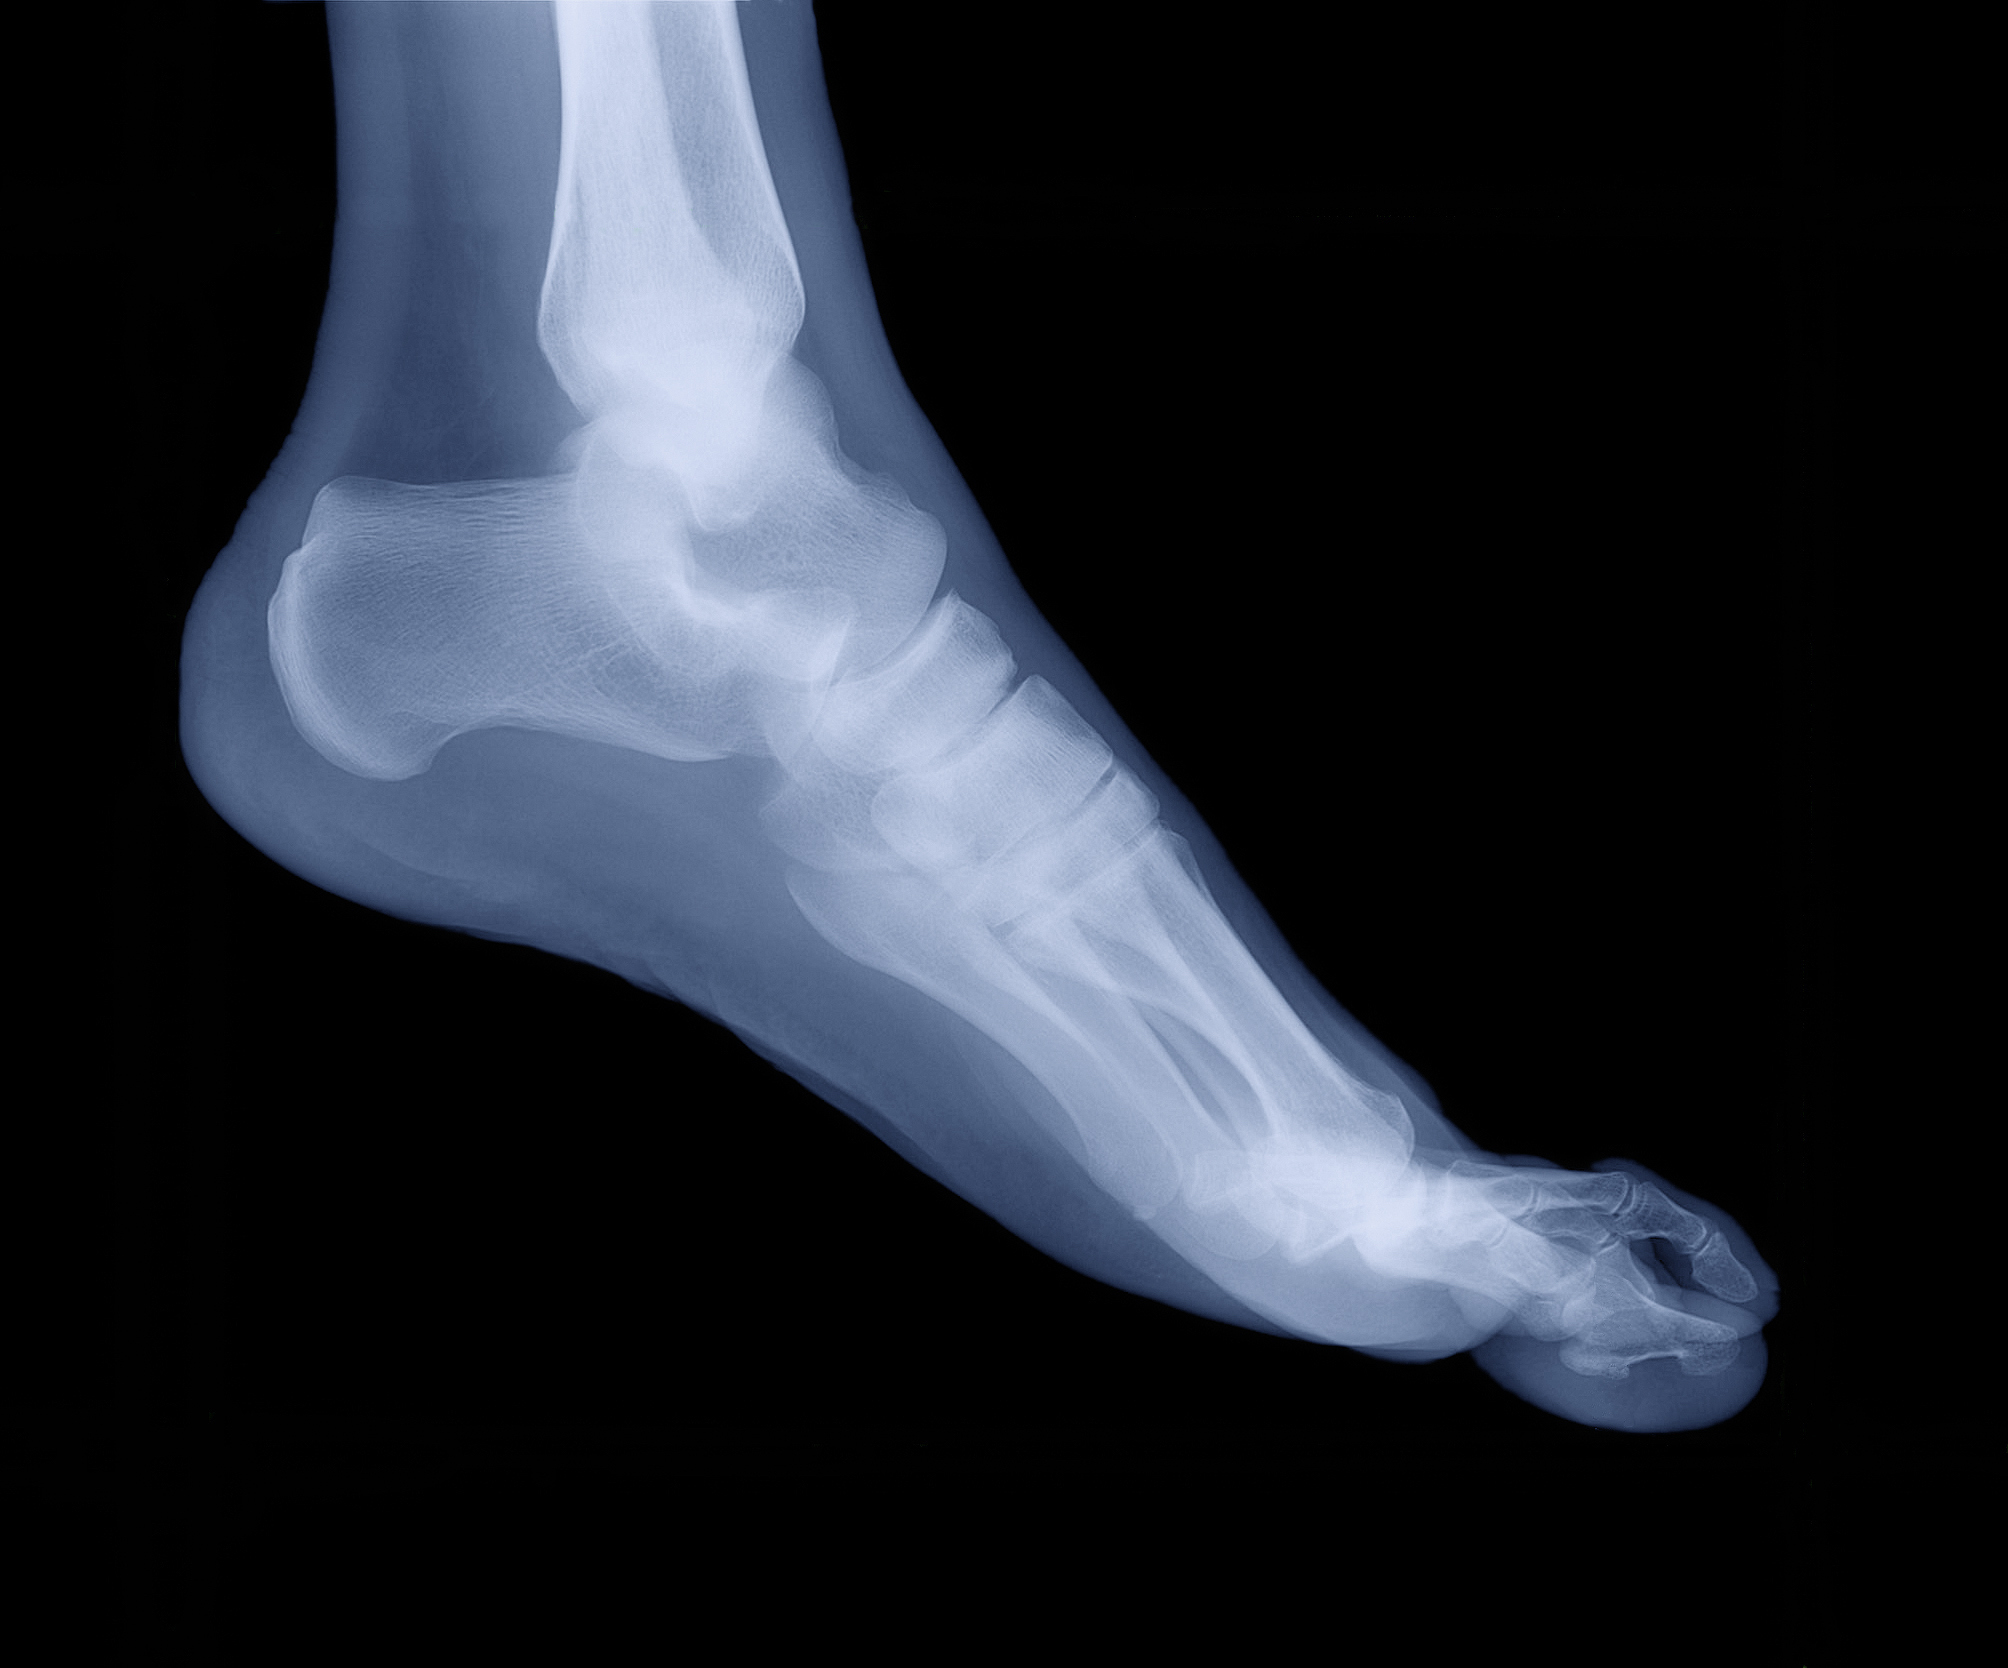 X-ray of a human foot